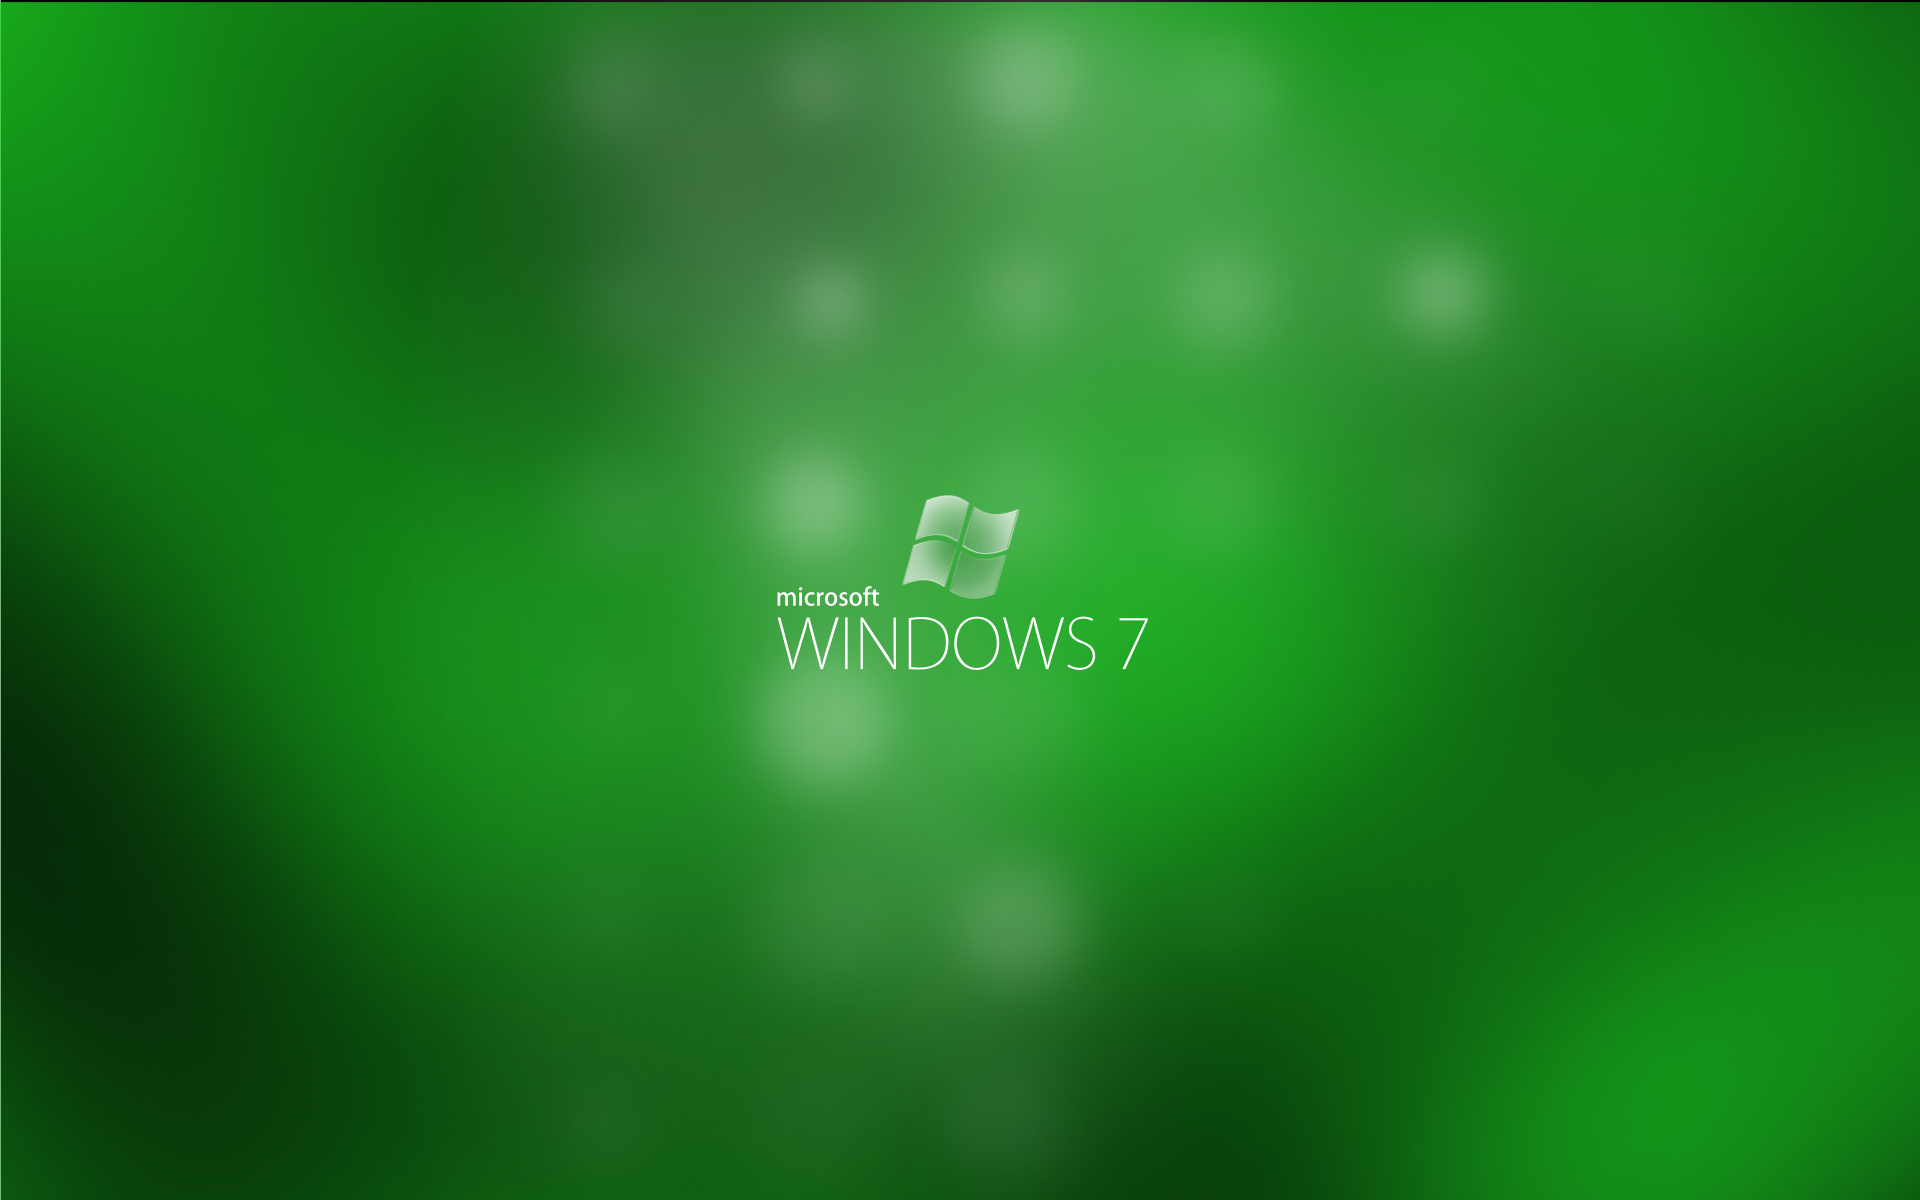 Windows 7 Awesome Backgrounds